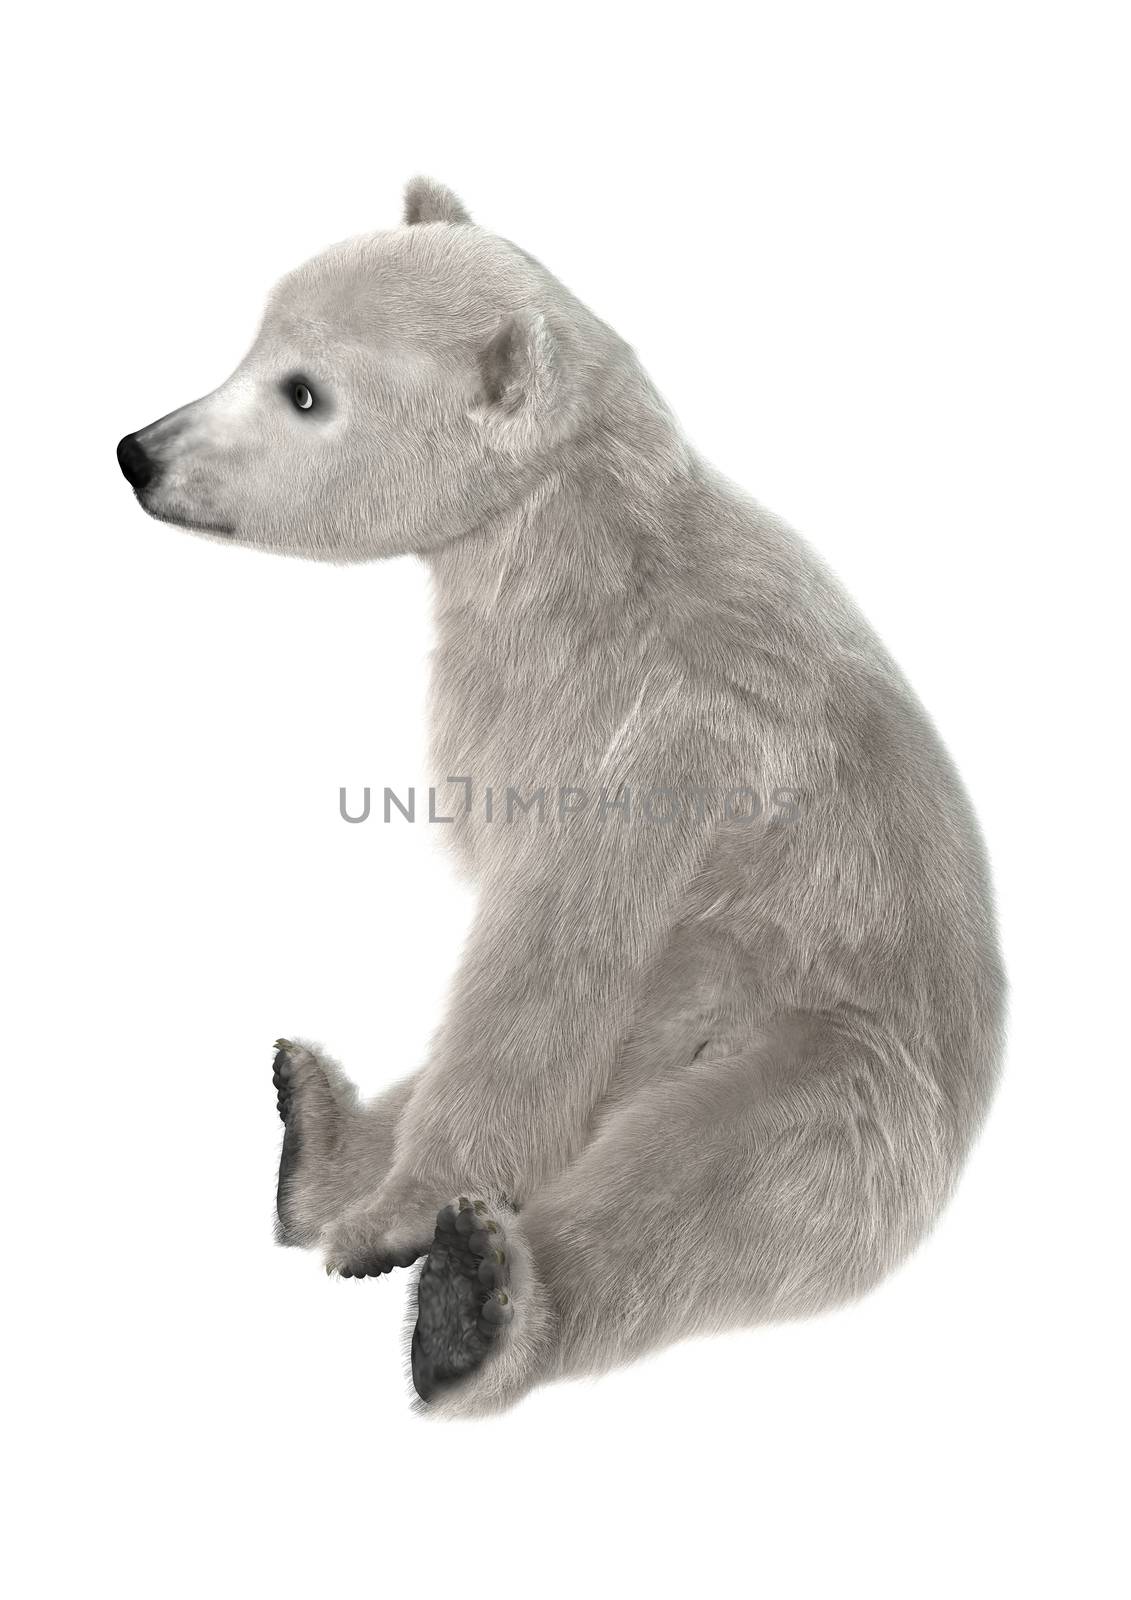 3D digital render of a polar bear cub sitting isolated on white background